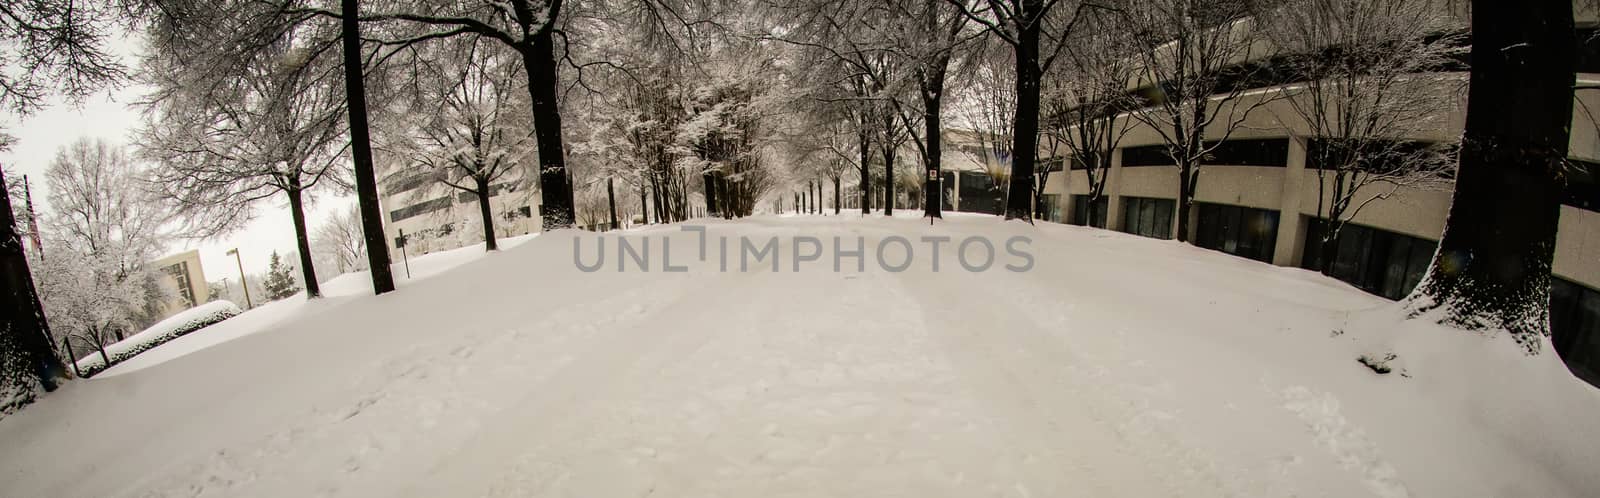 snow covered road and trees after winter storm by digidreamgrafix